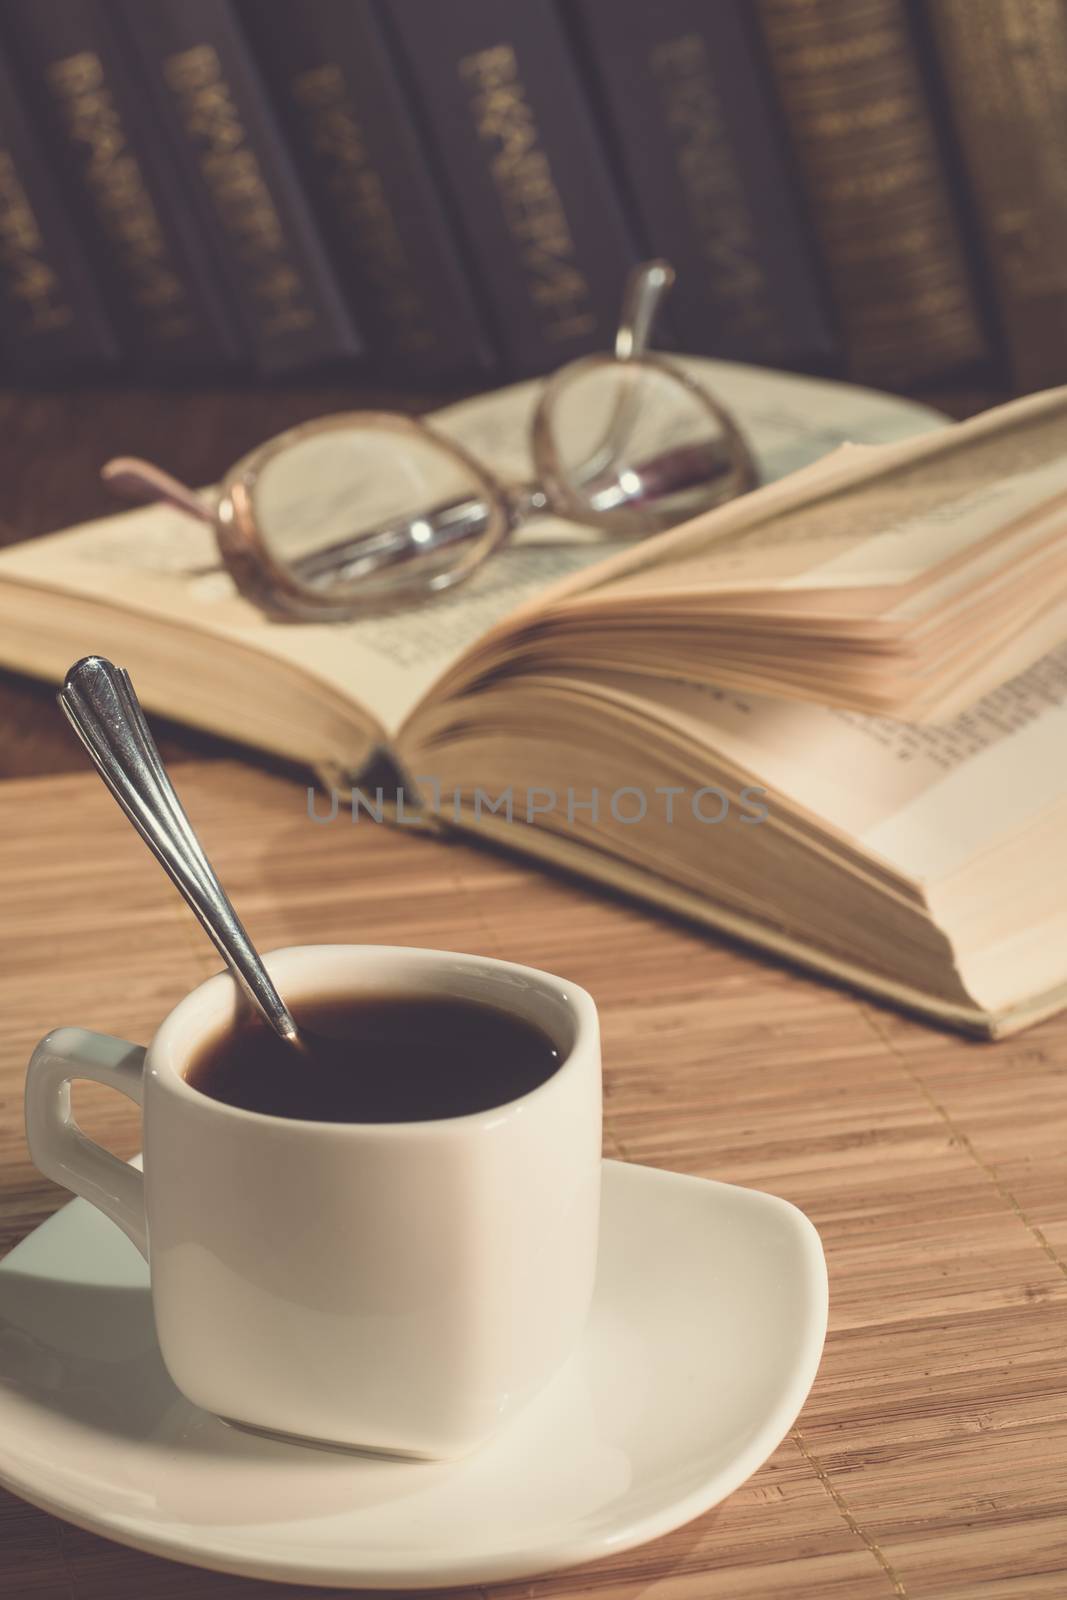 An open book and a cup of coffee on the table. Glasses. A cup of coffee in the evening light.